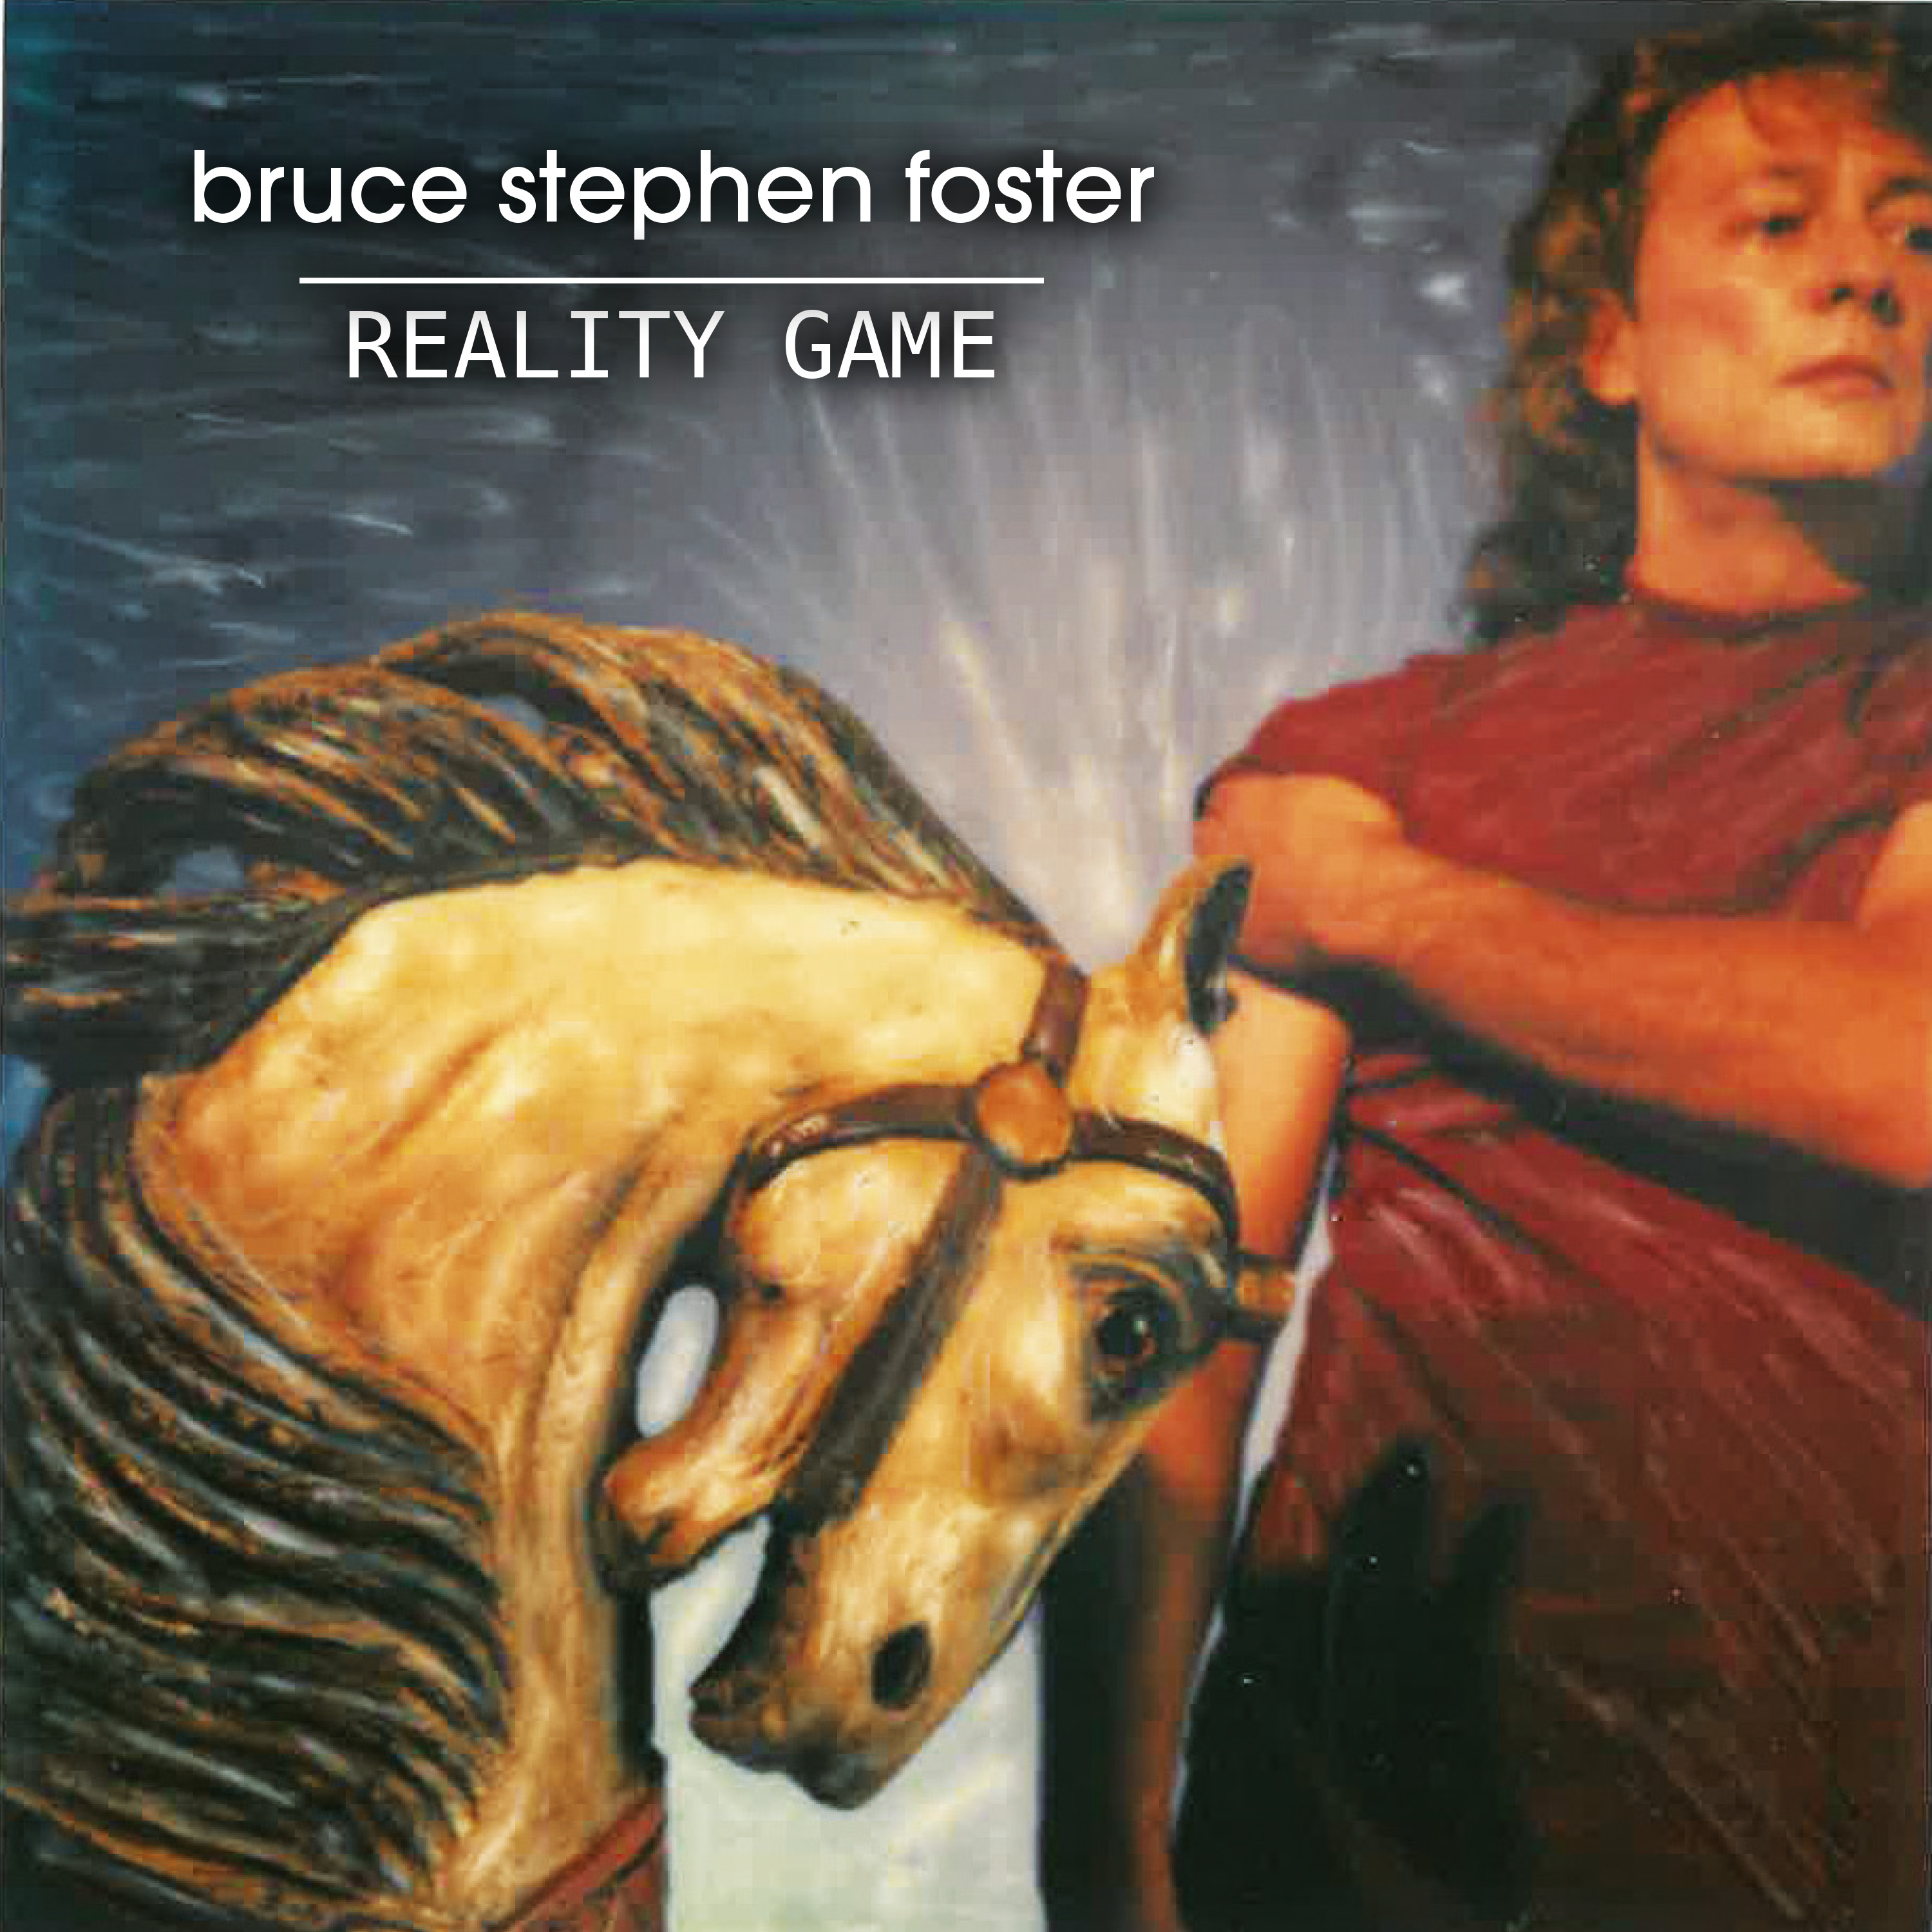 Reality Game by Bruce Stephen Foster